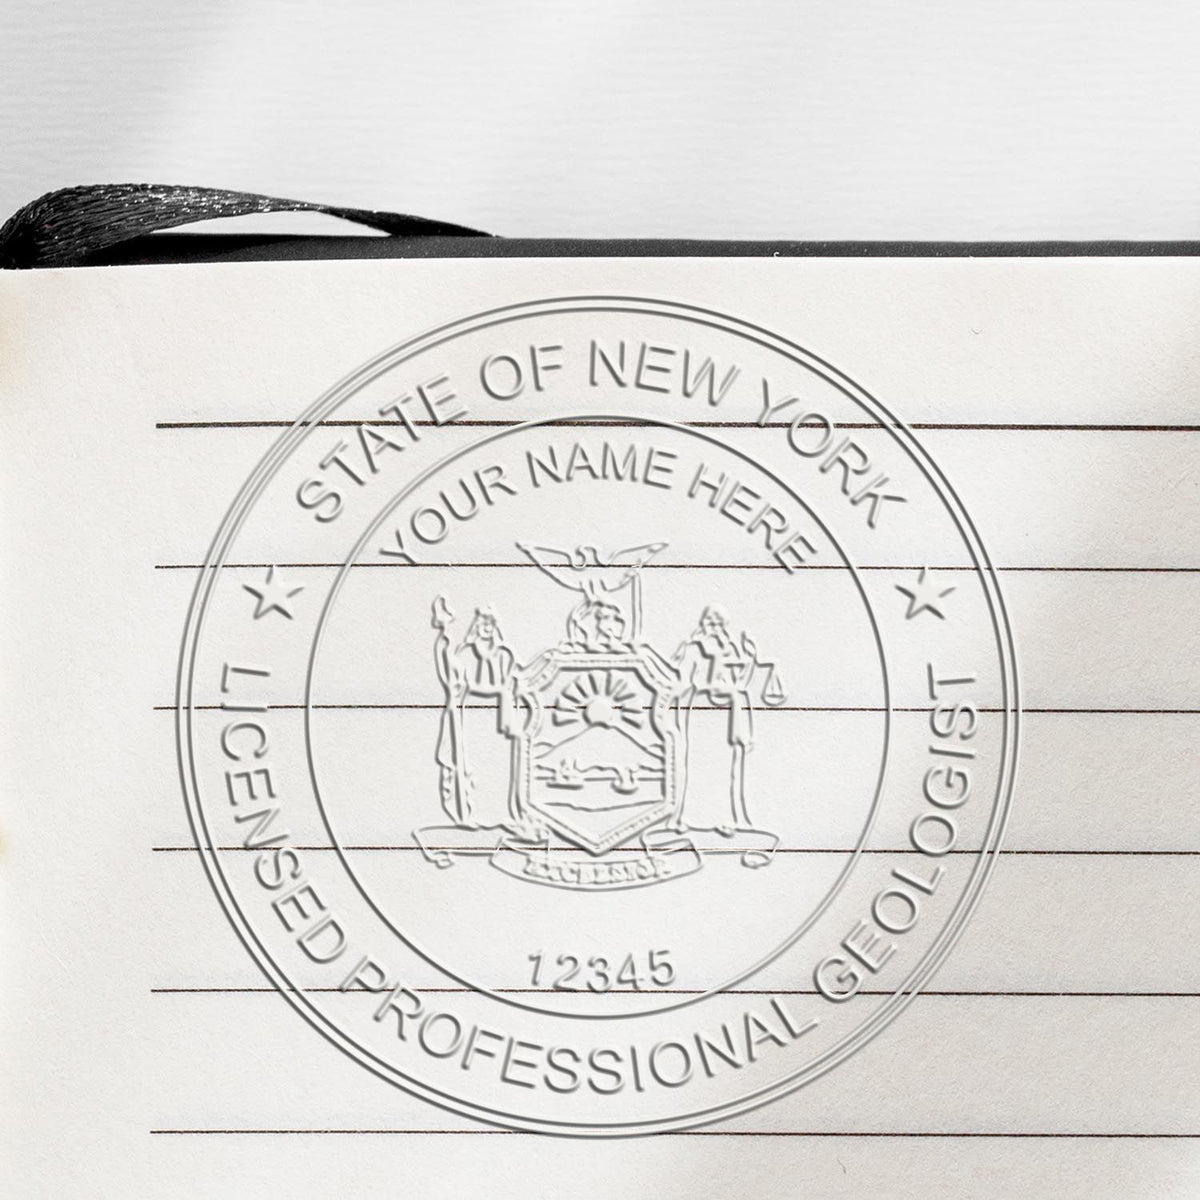 An alternative view of the State of New York Extended Long Reach Geologist Seal stamped on a sheet of paper showing the image in use